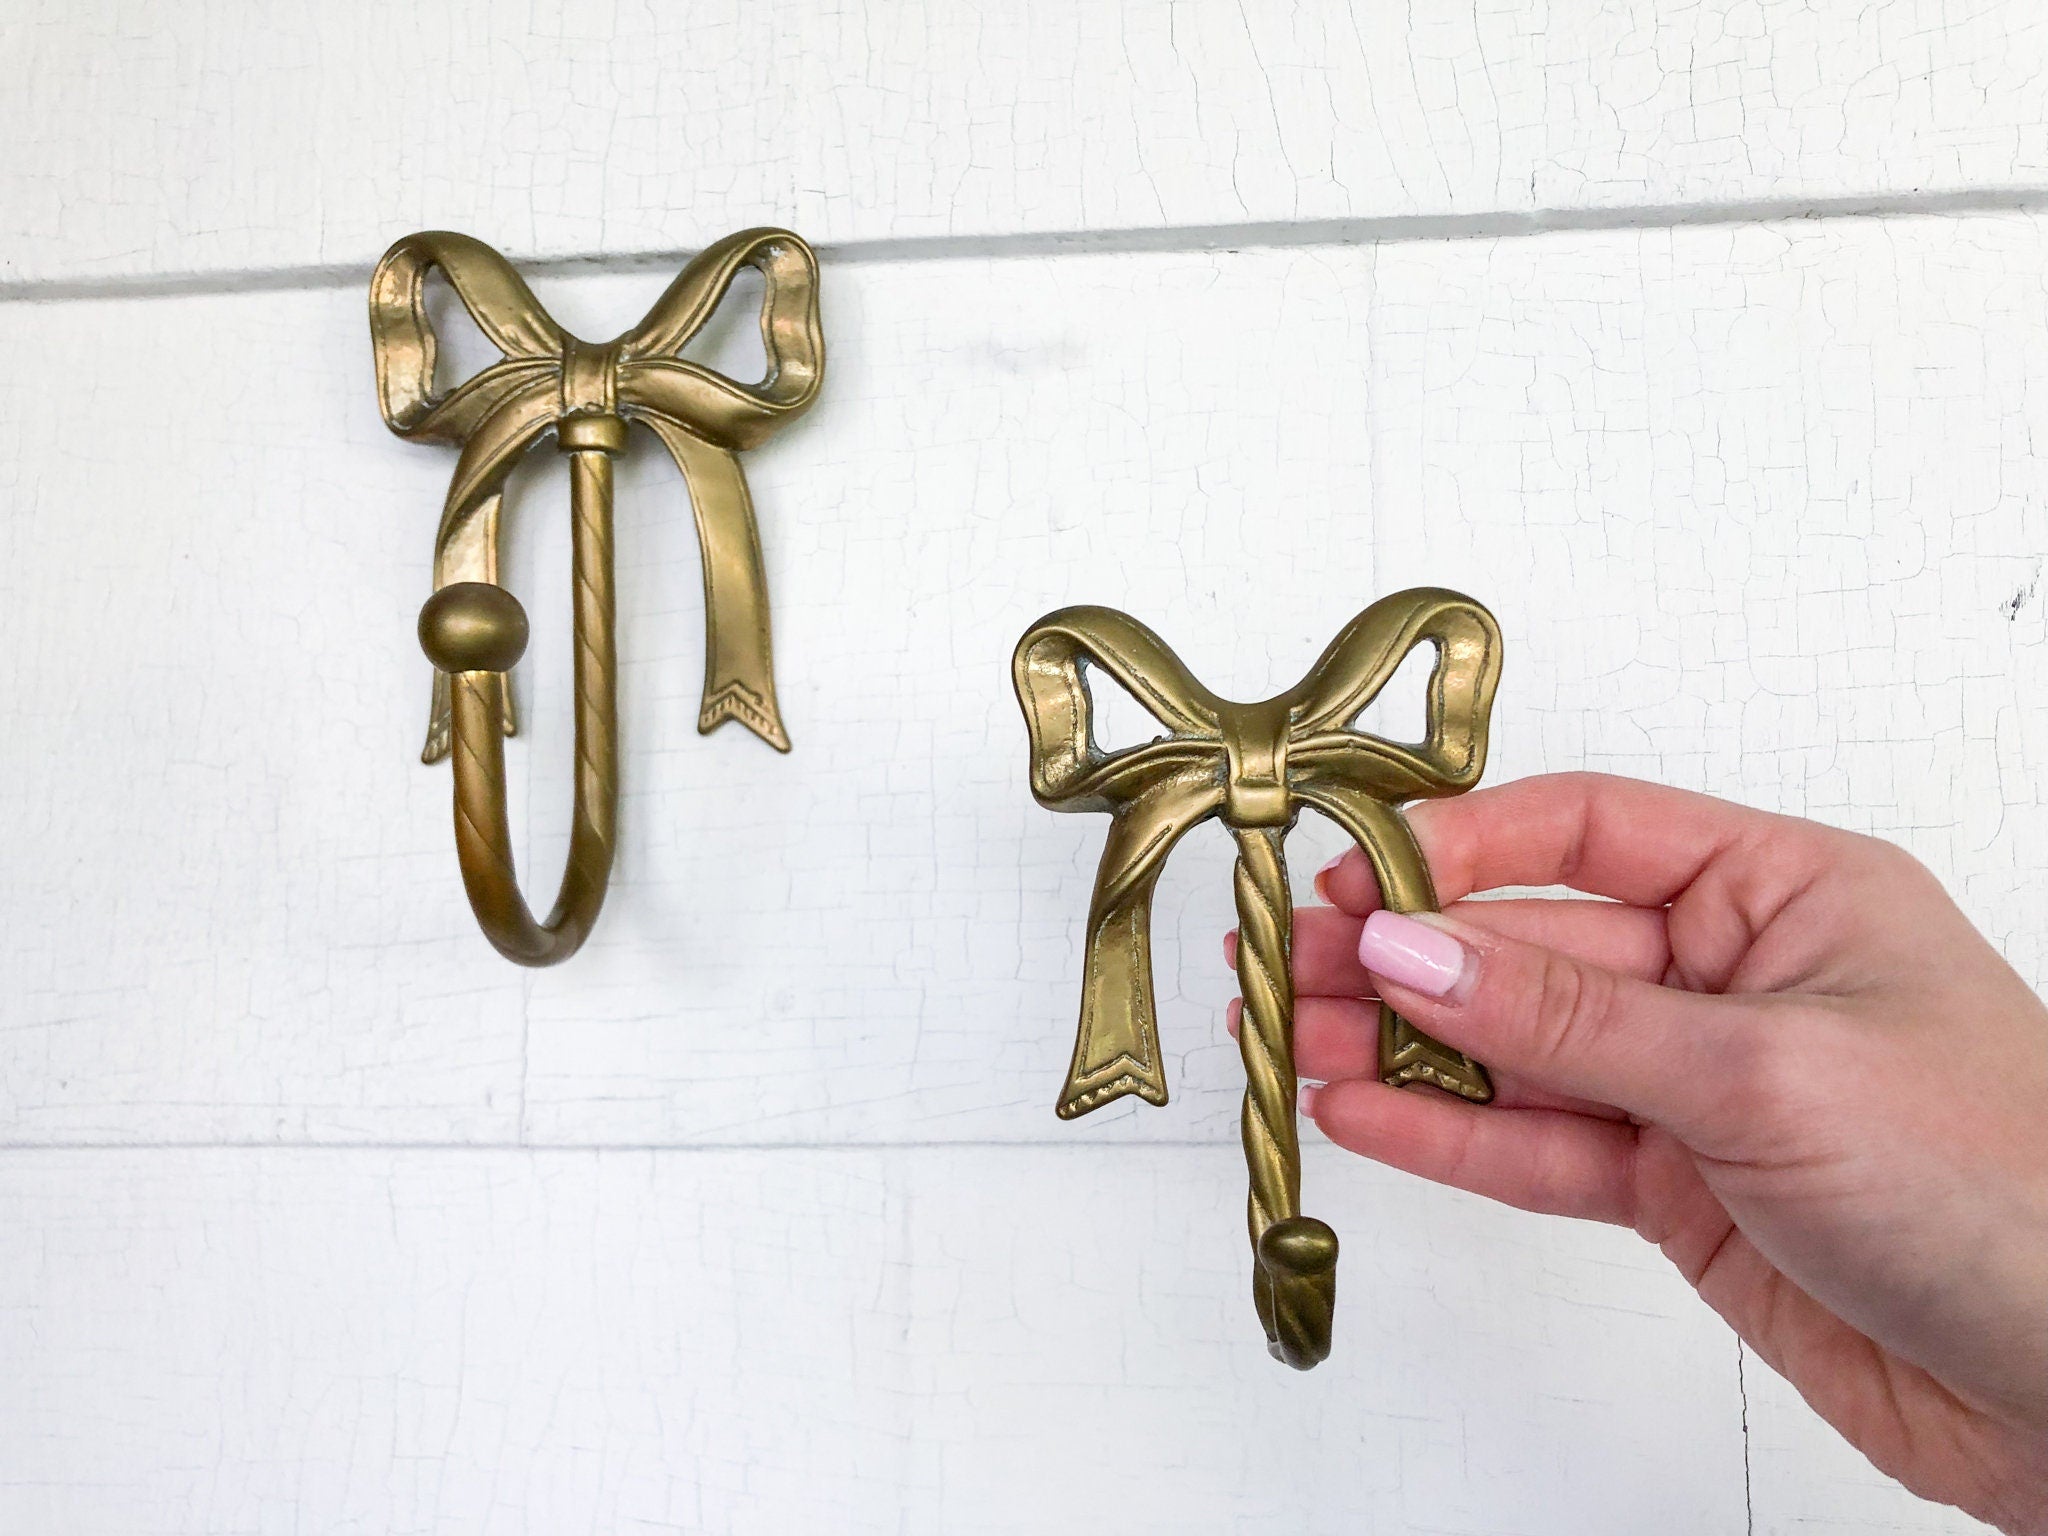 Vintage Brass Bow Wall Hooks | Shop THRILLING